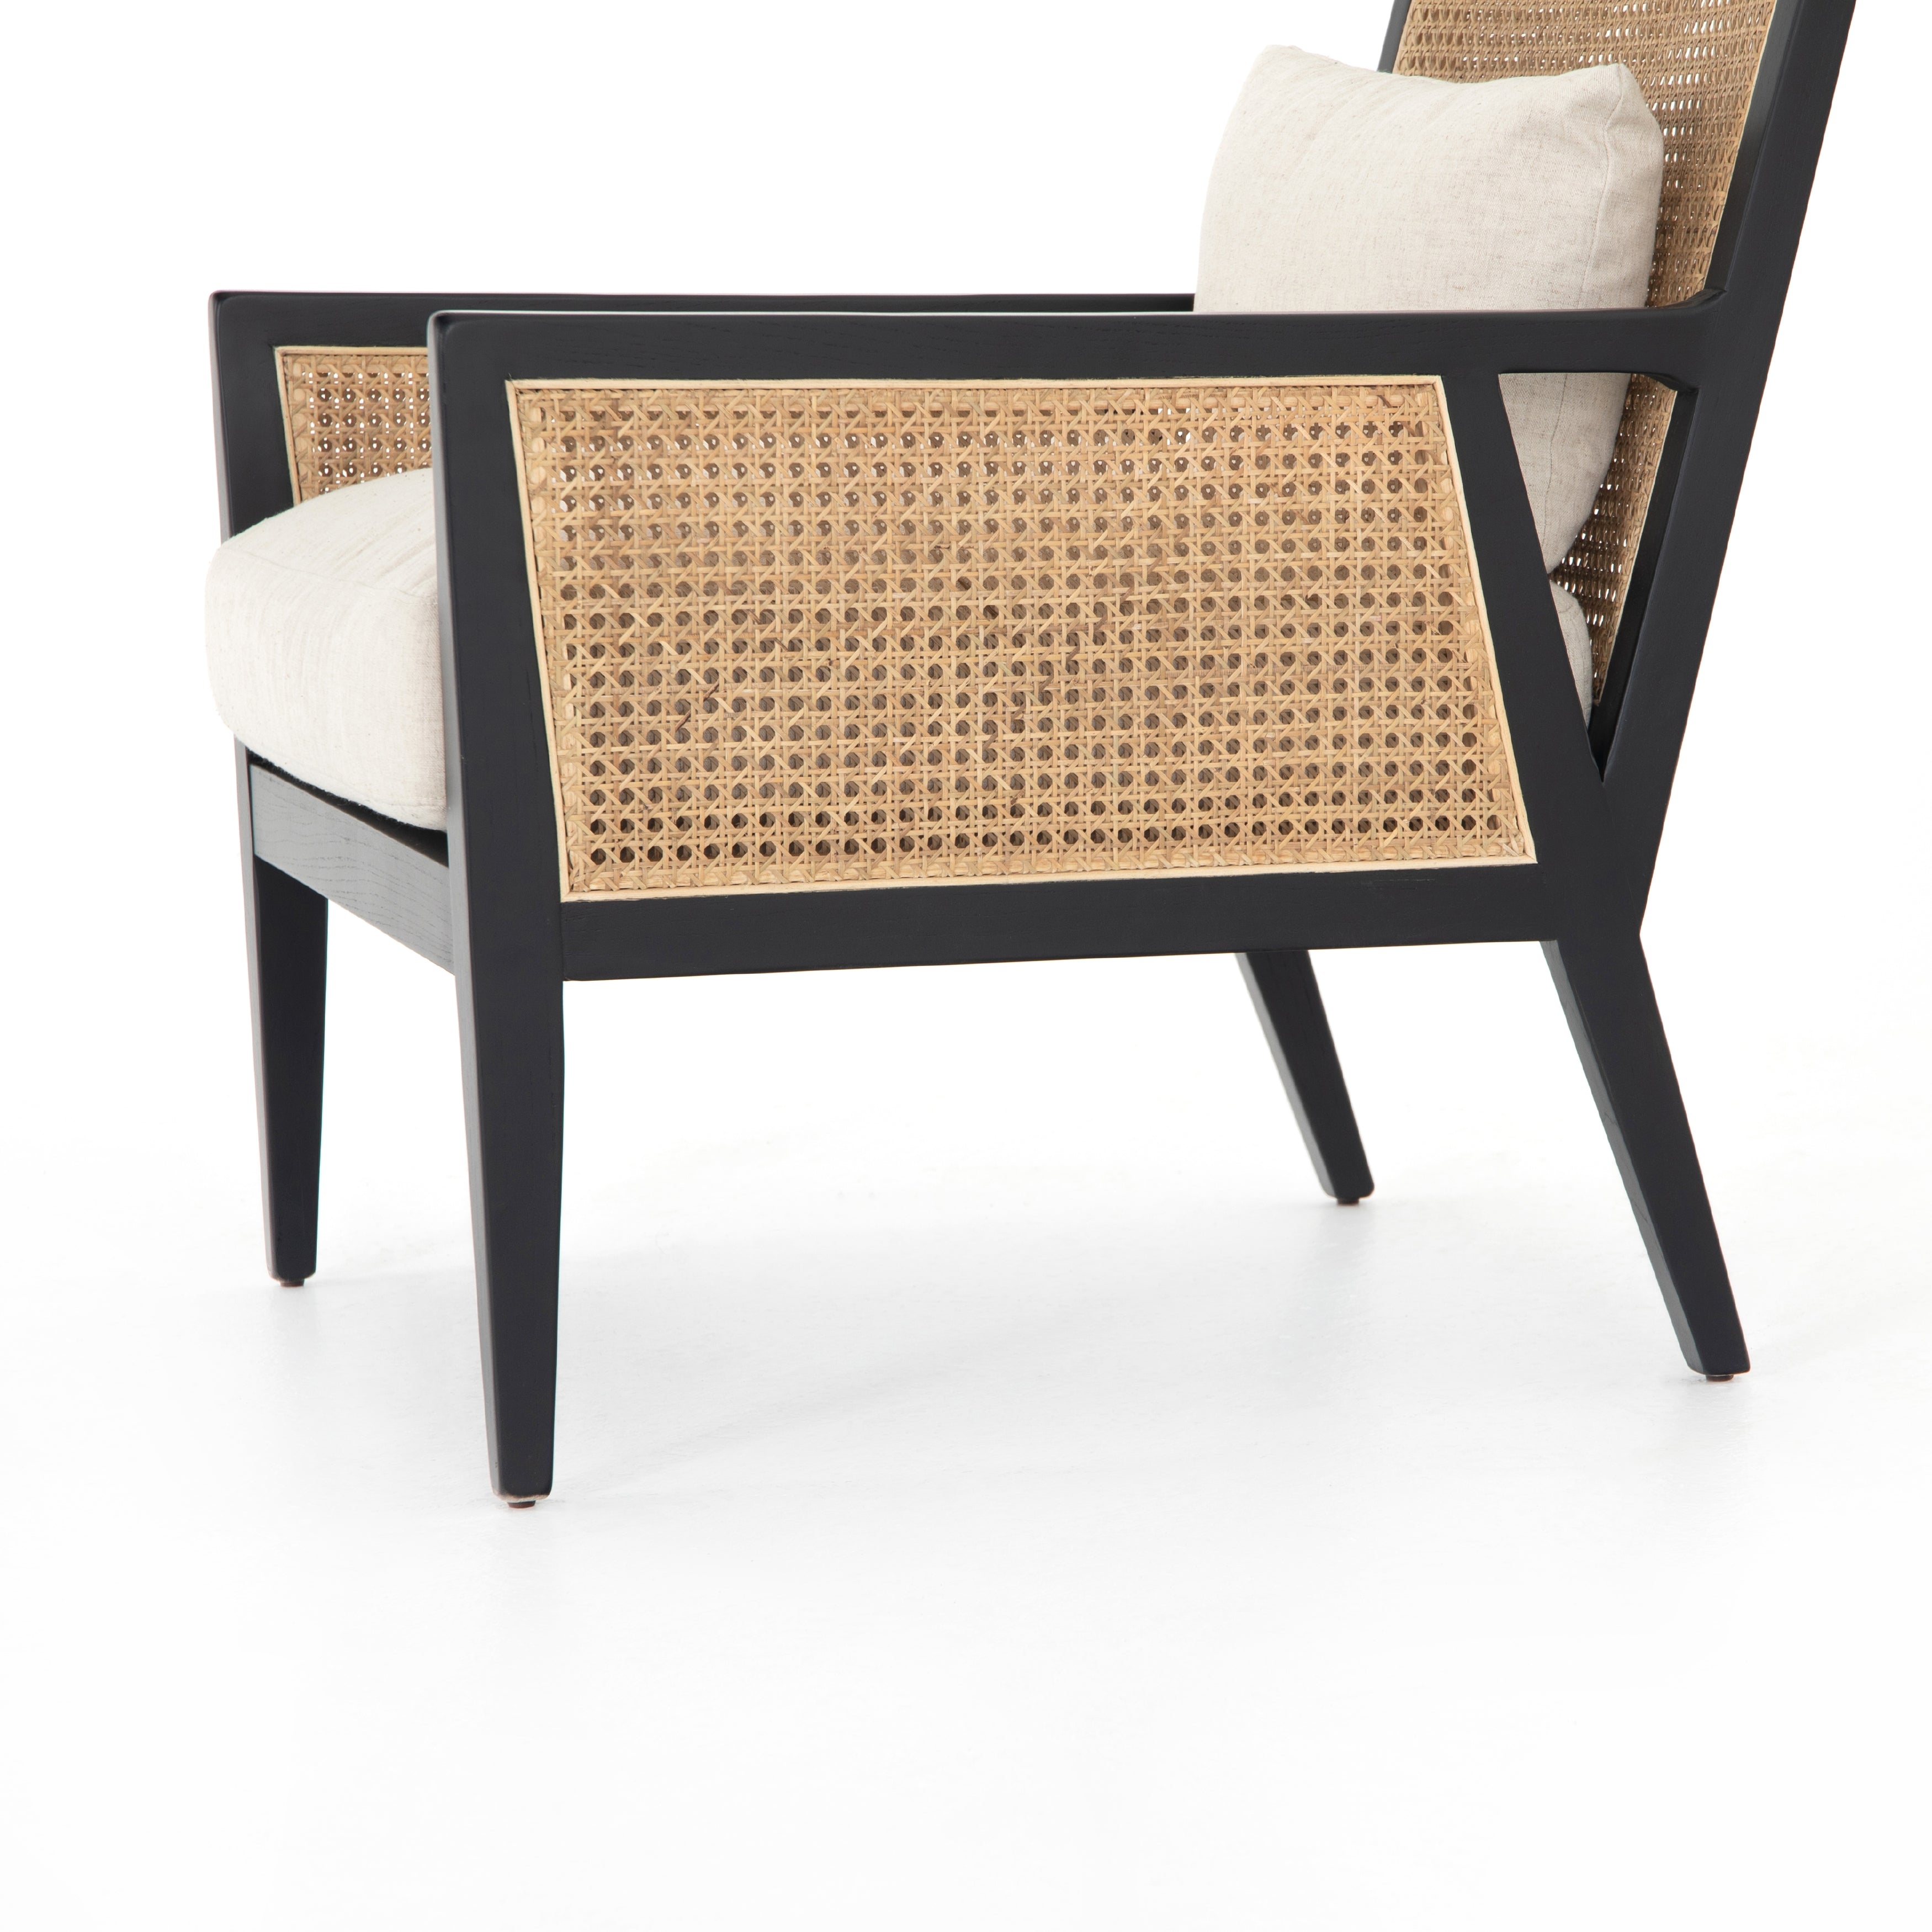 Savile Flax Fabric and Natural Cane with Brushed Ebony Parawood | Antonia Cane Chair | Valley Ridge Furniture